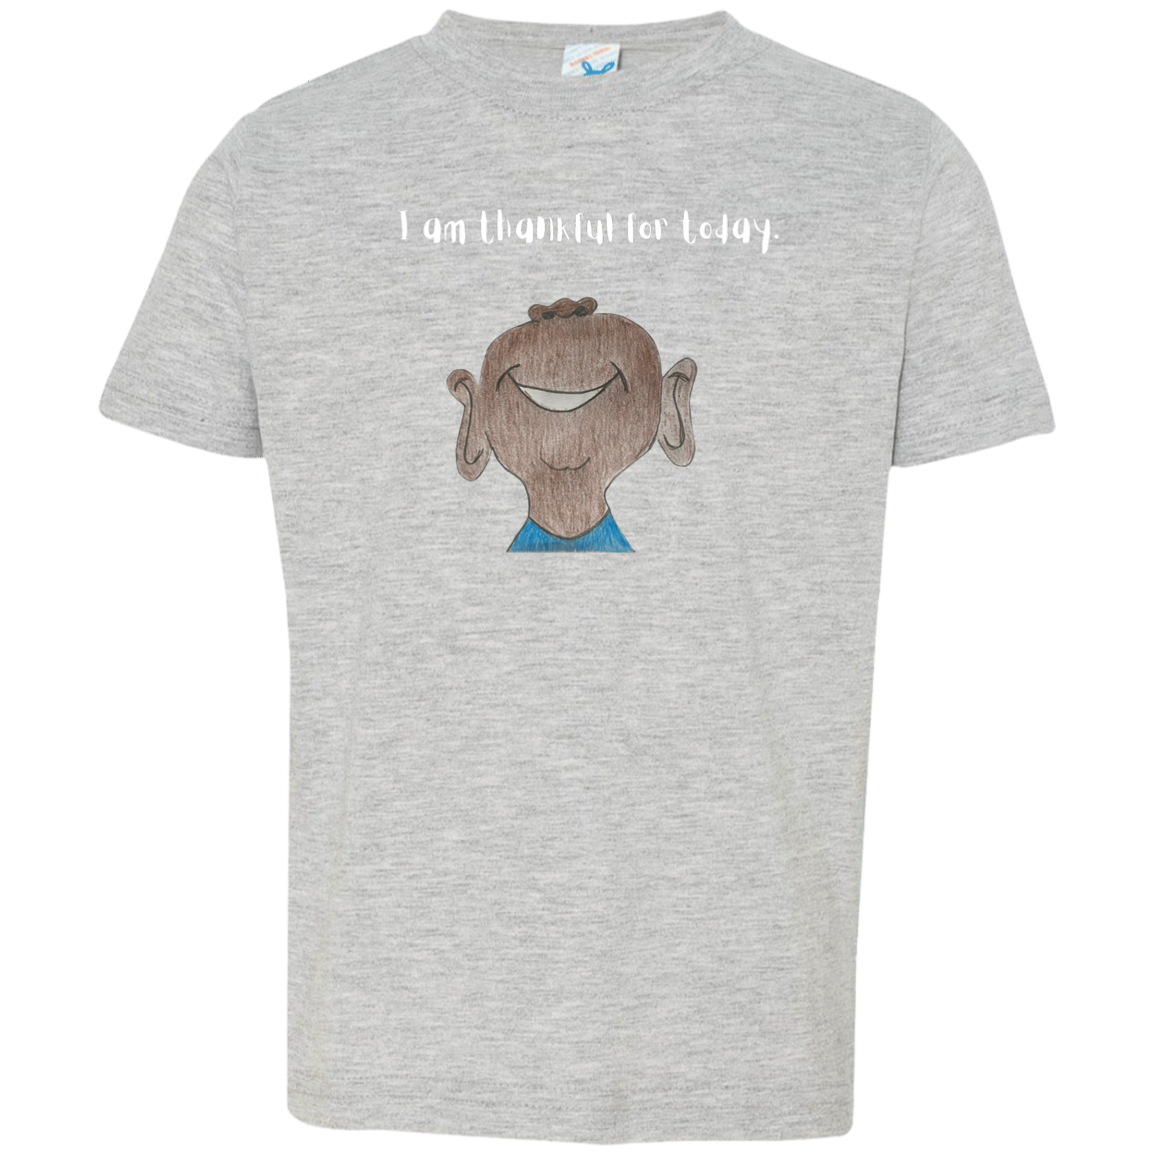 I am thankful for today Toddler Jersey T-Shirt